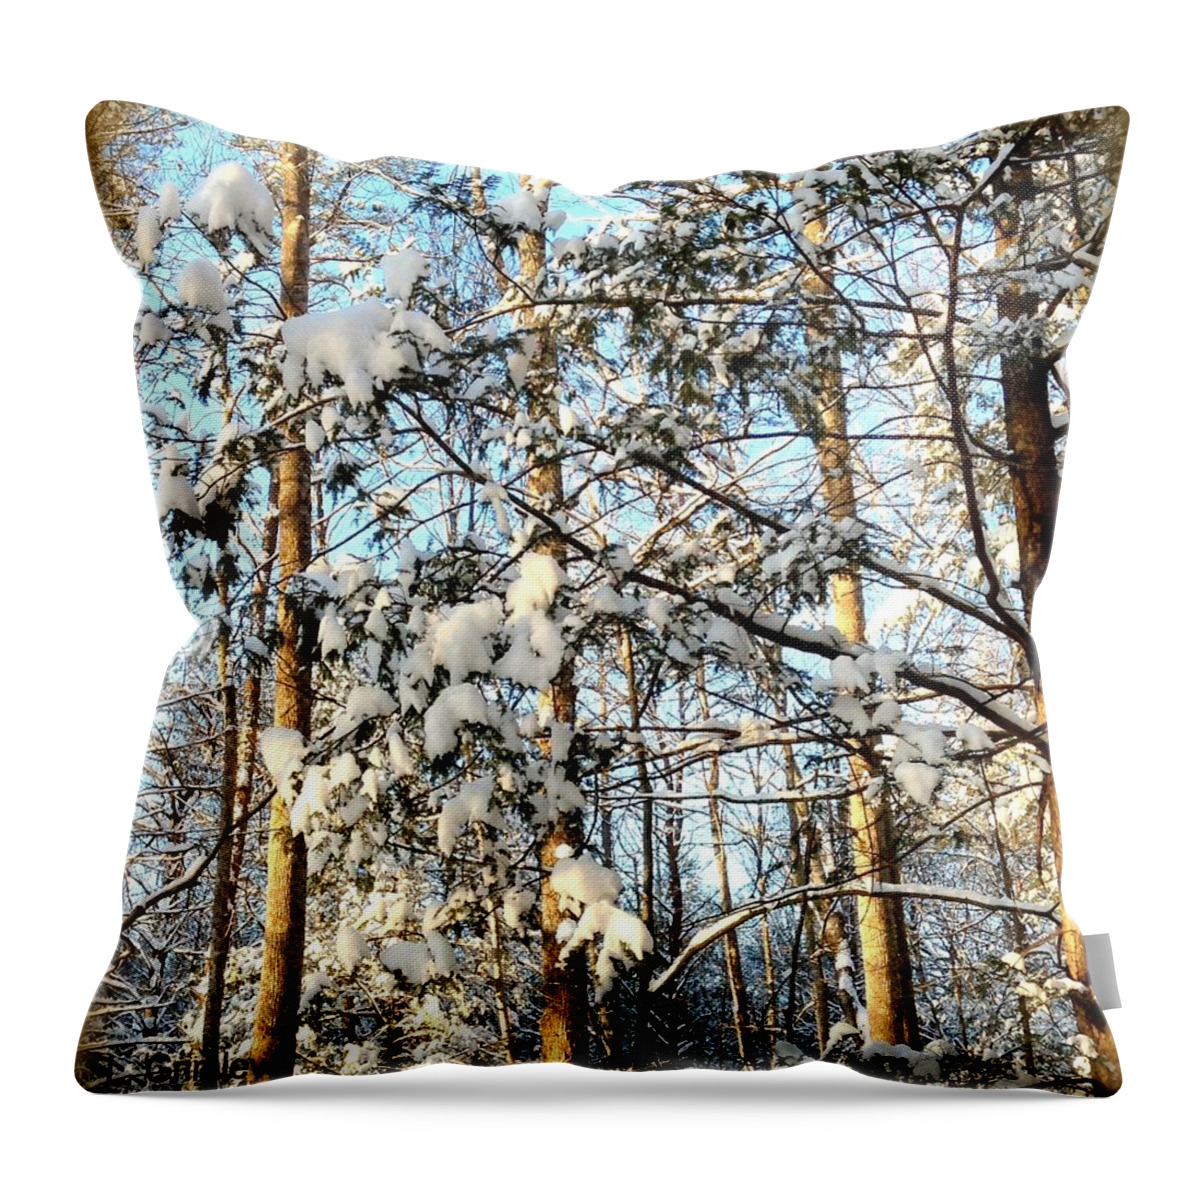 Snow Throw Pillow featuring the photograph Winter In Cosby by Lessandra Grimley